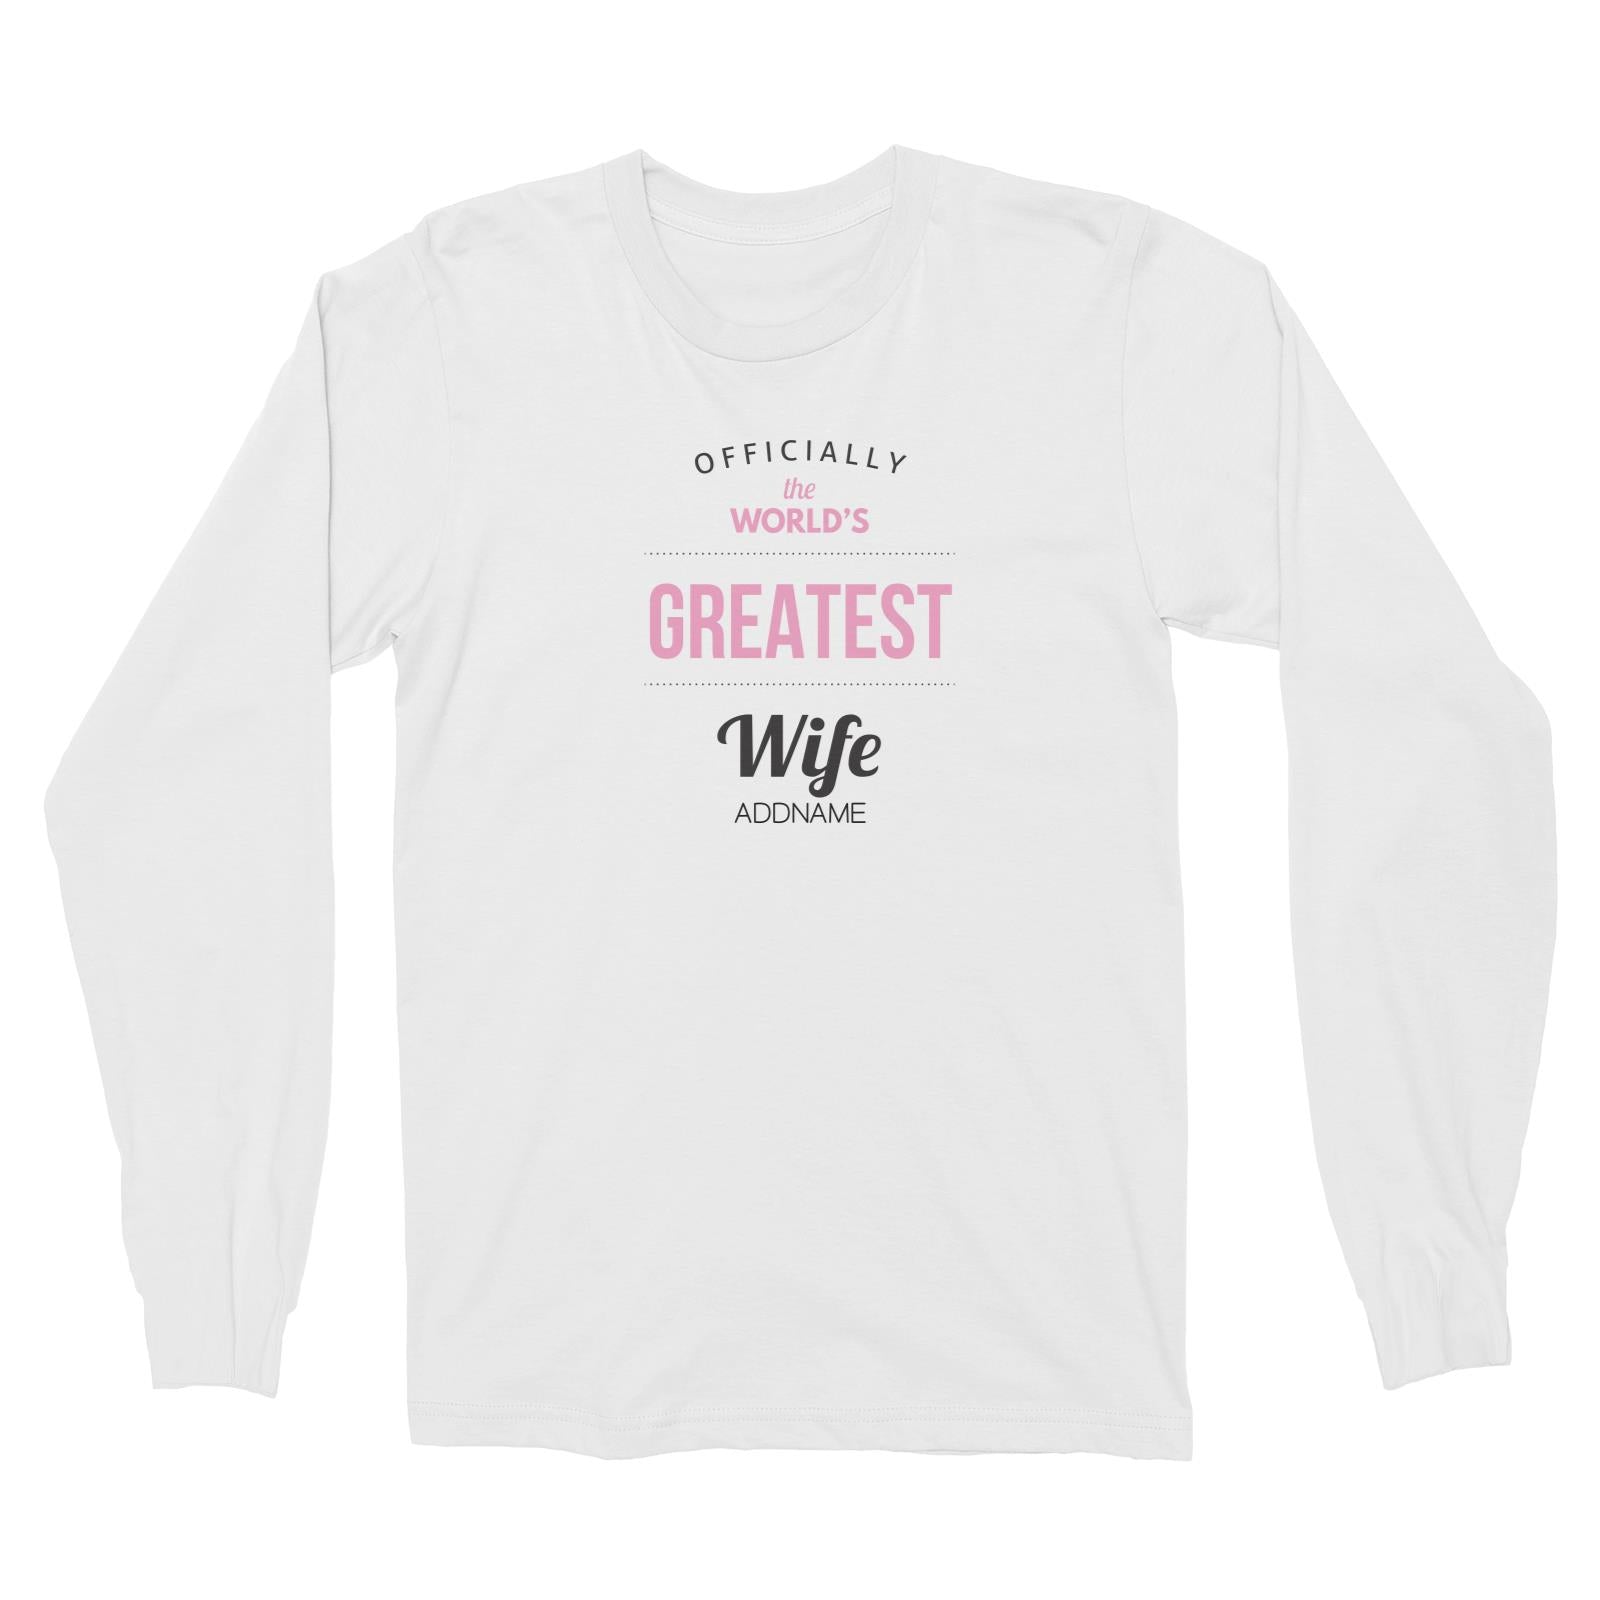 Husband and Wife Officially The World's Geatest Wife Addname Long Sleeve Unisex T-Shirt